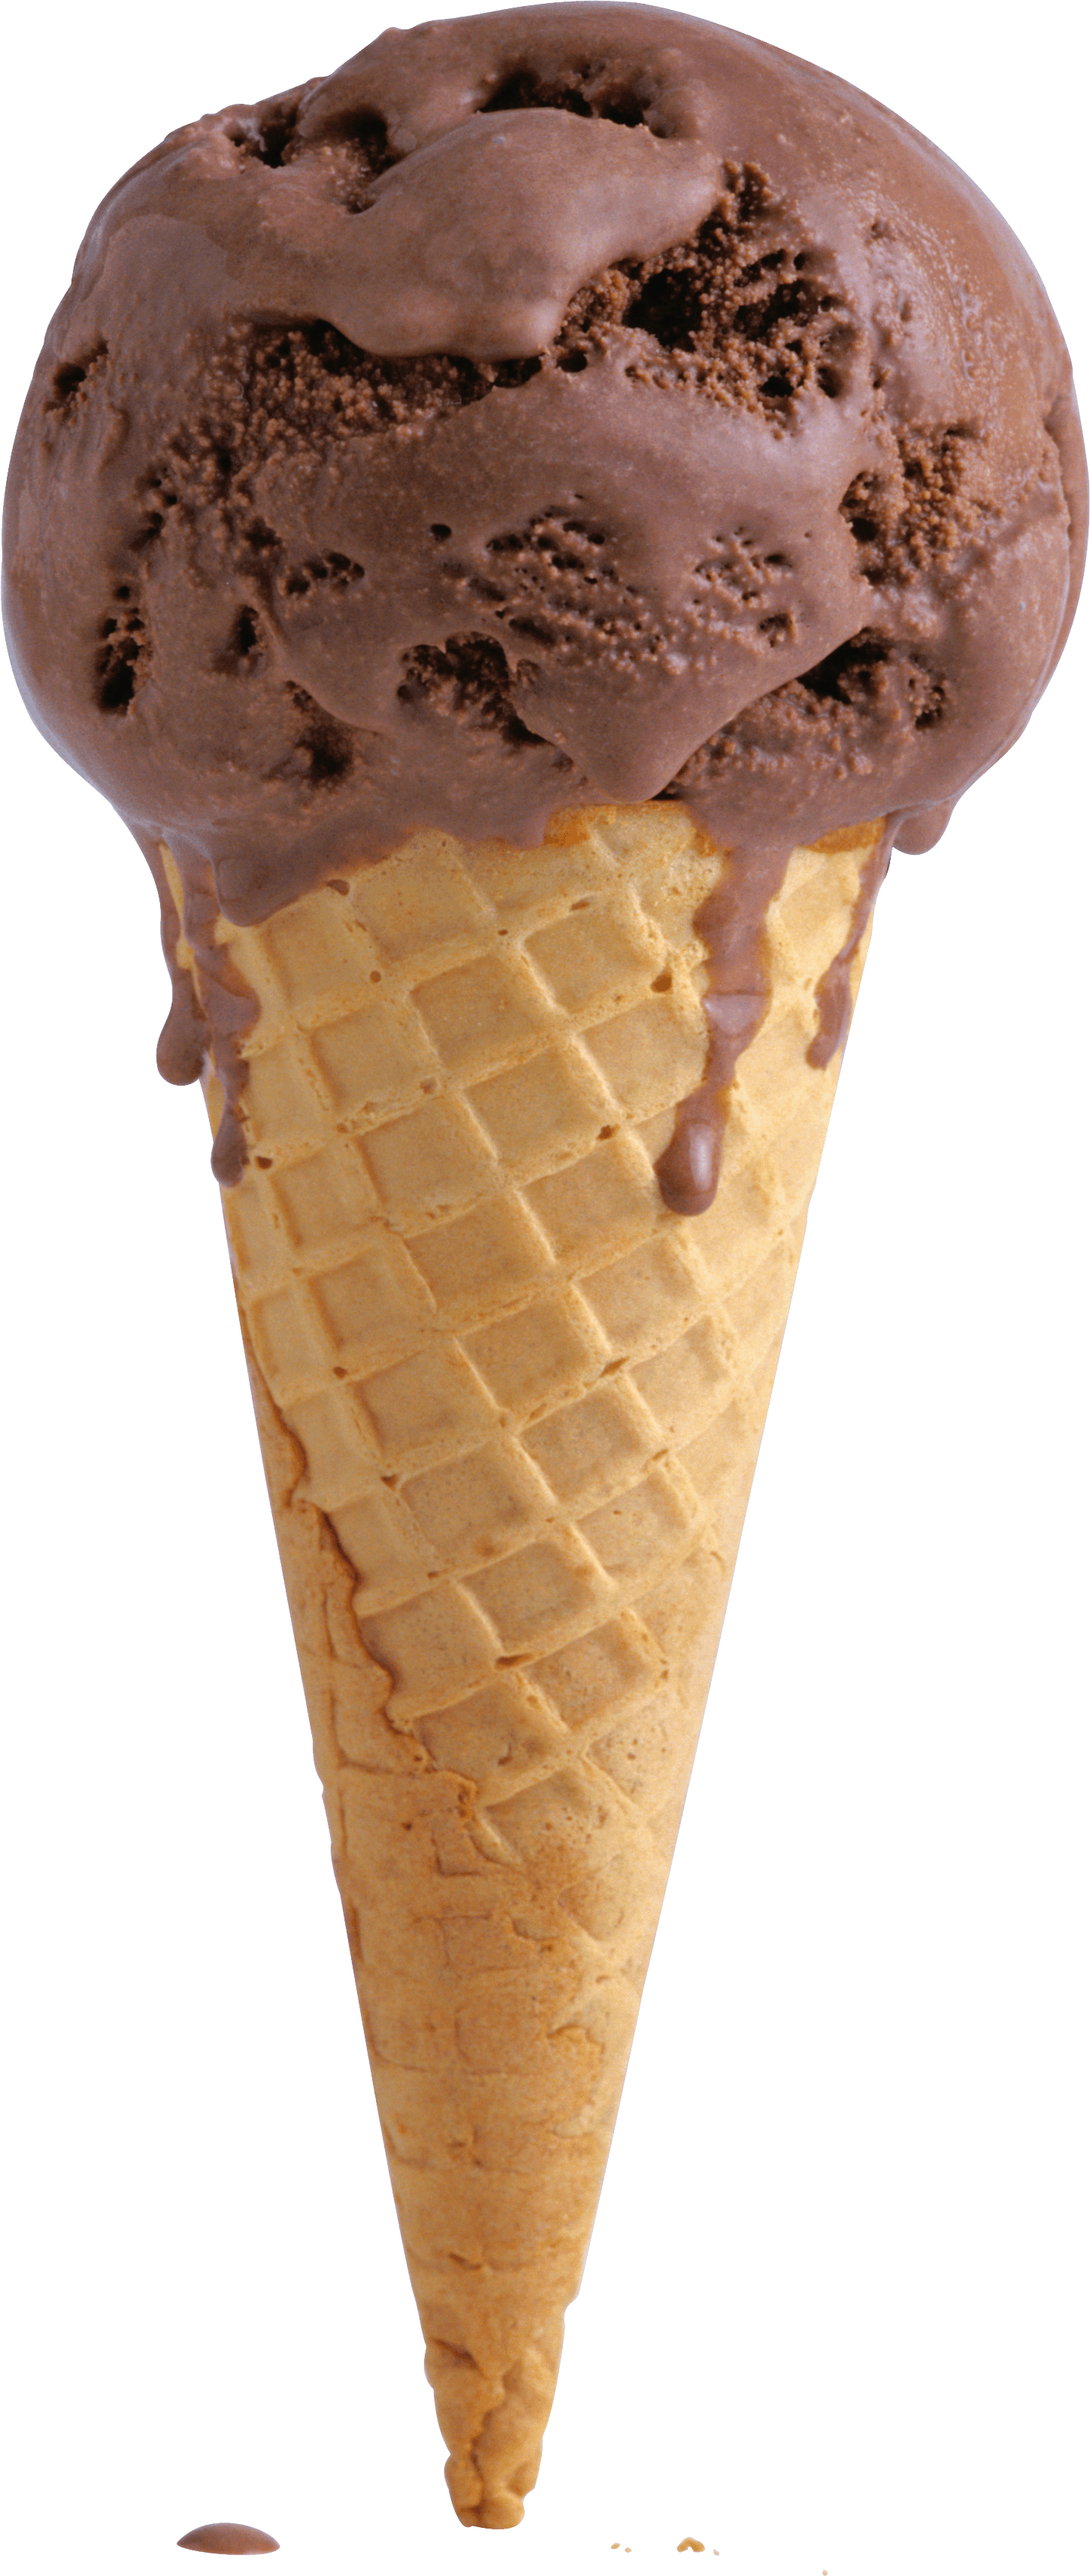 Chocolate Ice Cream Png Image Png Image - Ice Cream Cone Png (1450x3426)